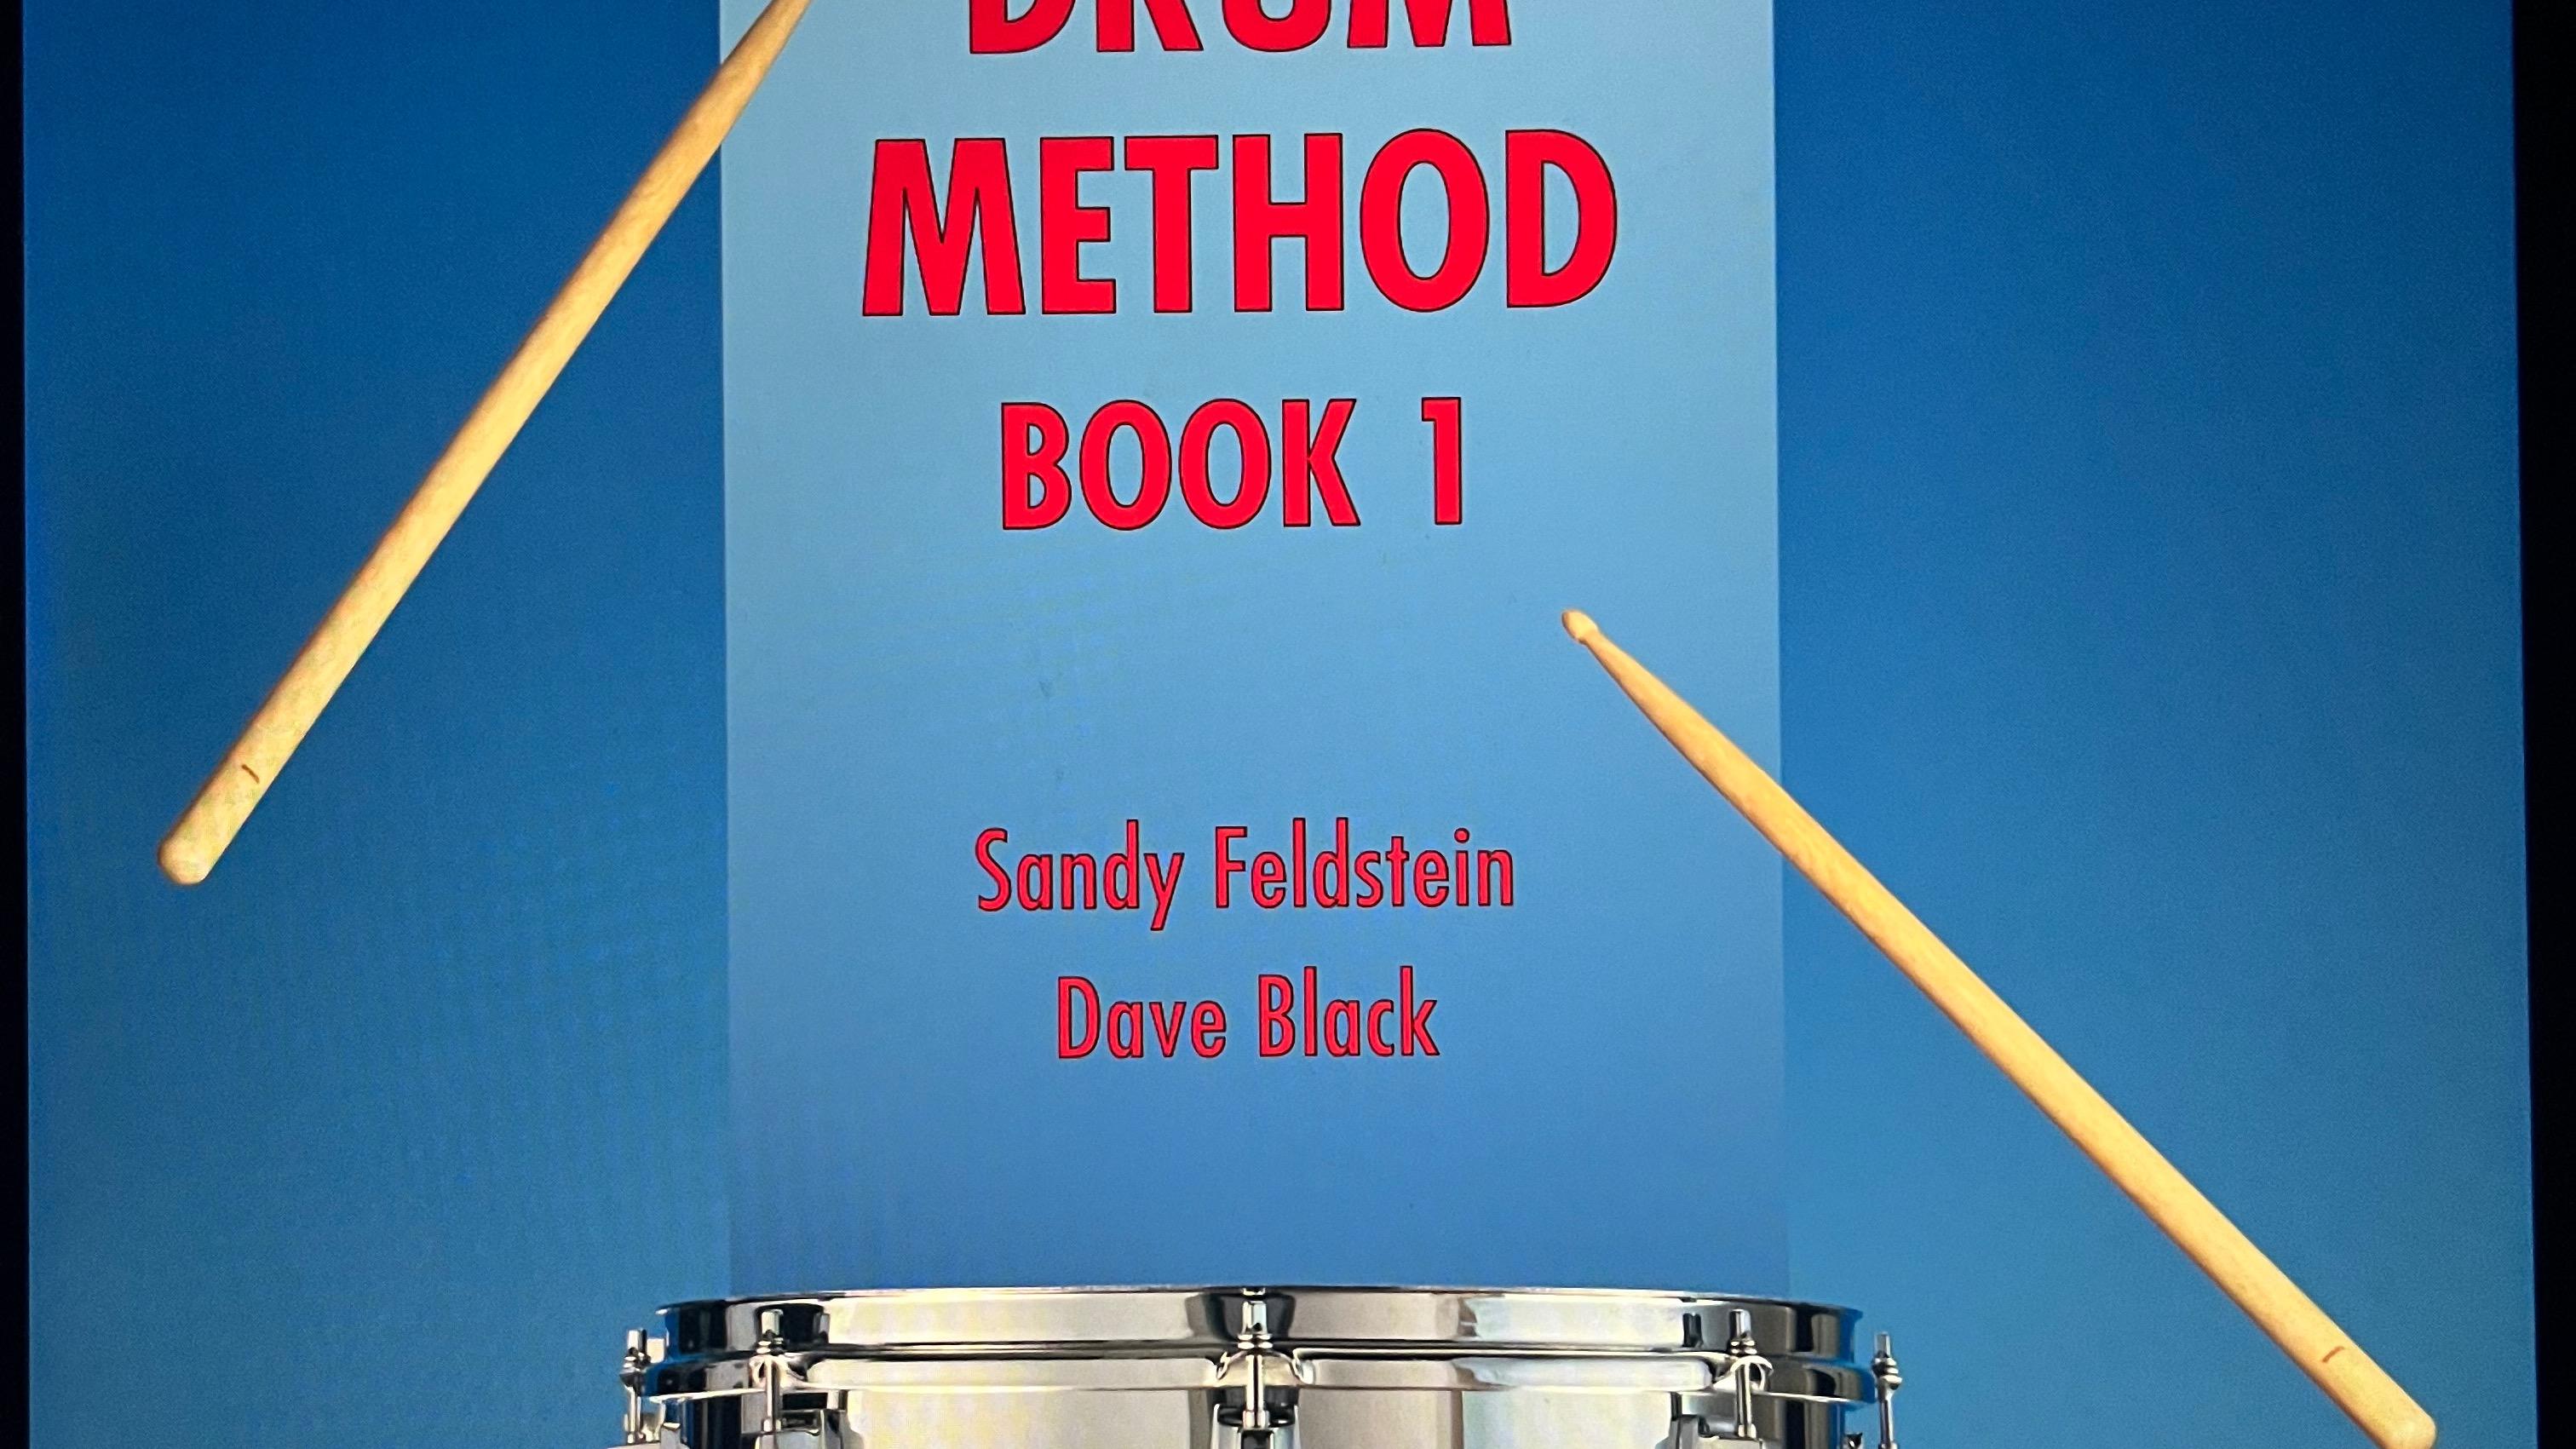 Alfred’s drum method book 1 (lesson 9 and combination study)